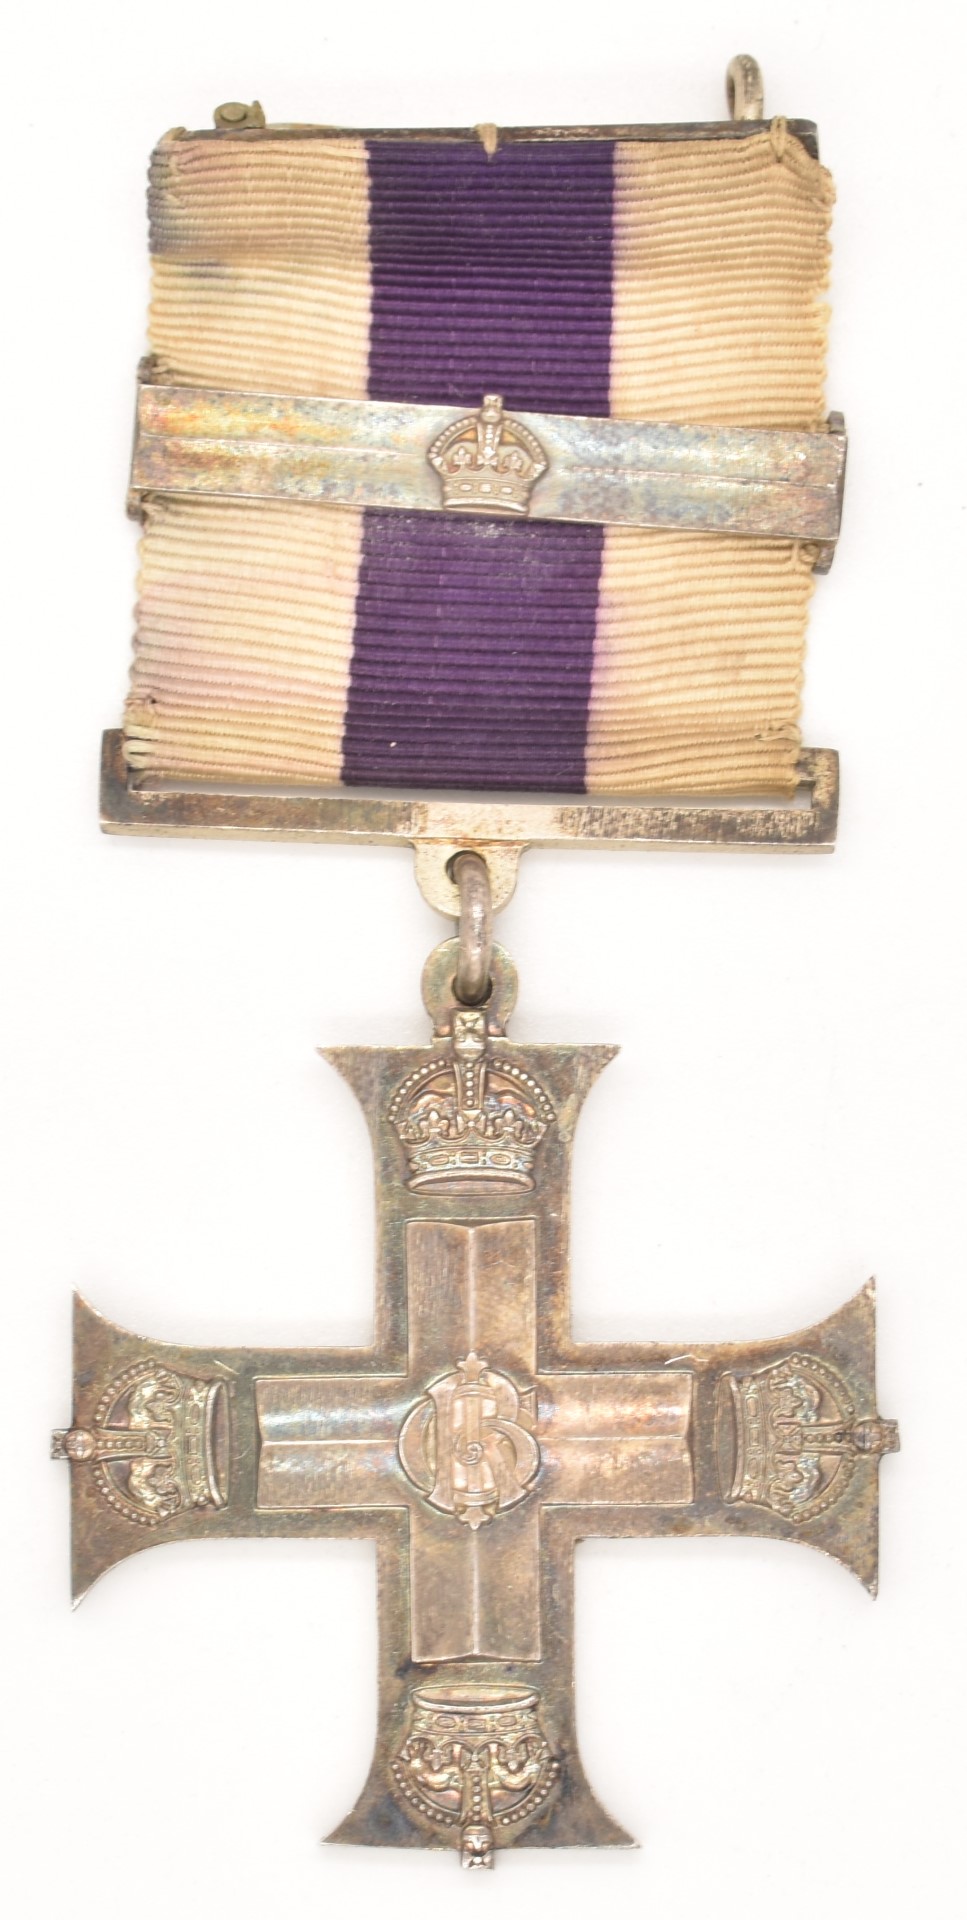 British Army WW1 Royal Artillery Military Cross medal and bar inscribed Cecil Humphries Harper, - Image 4 of 5